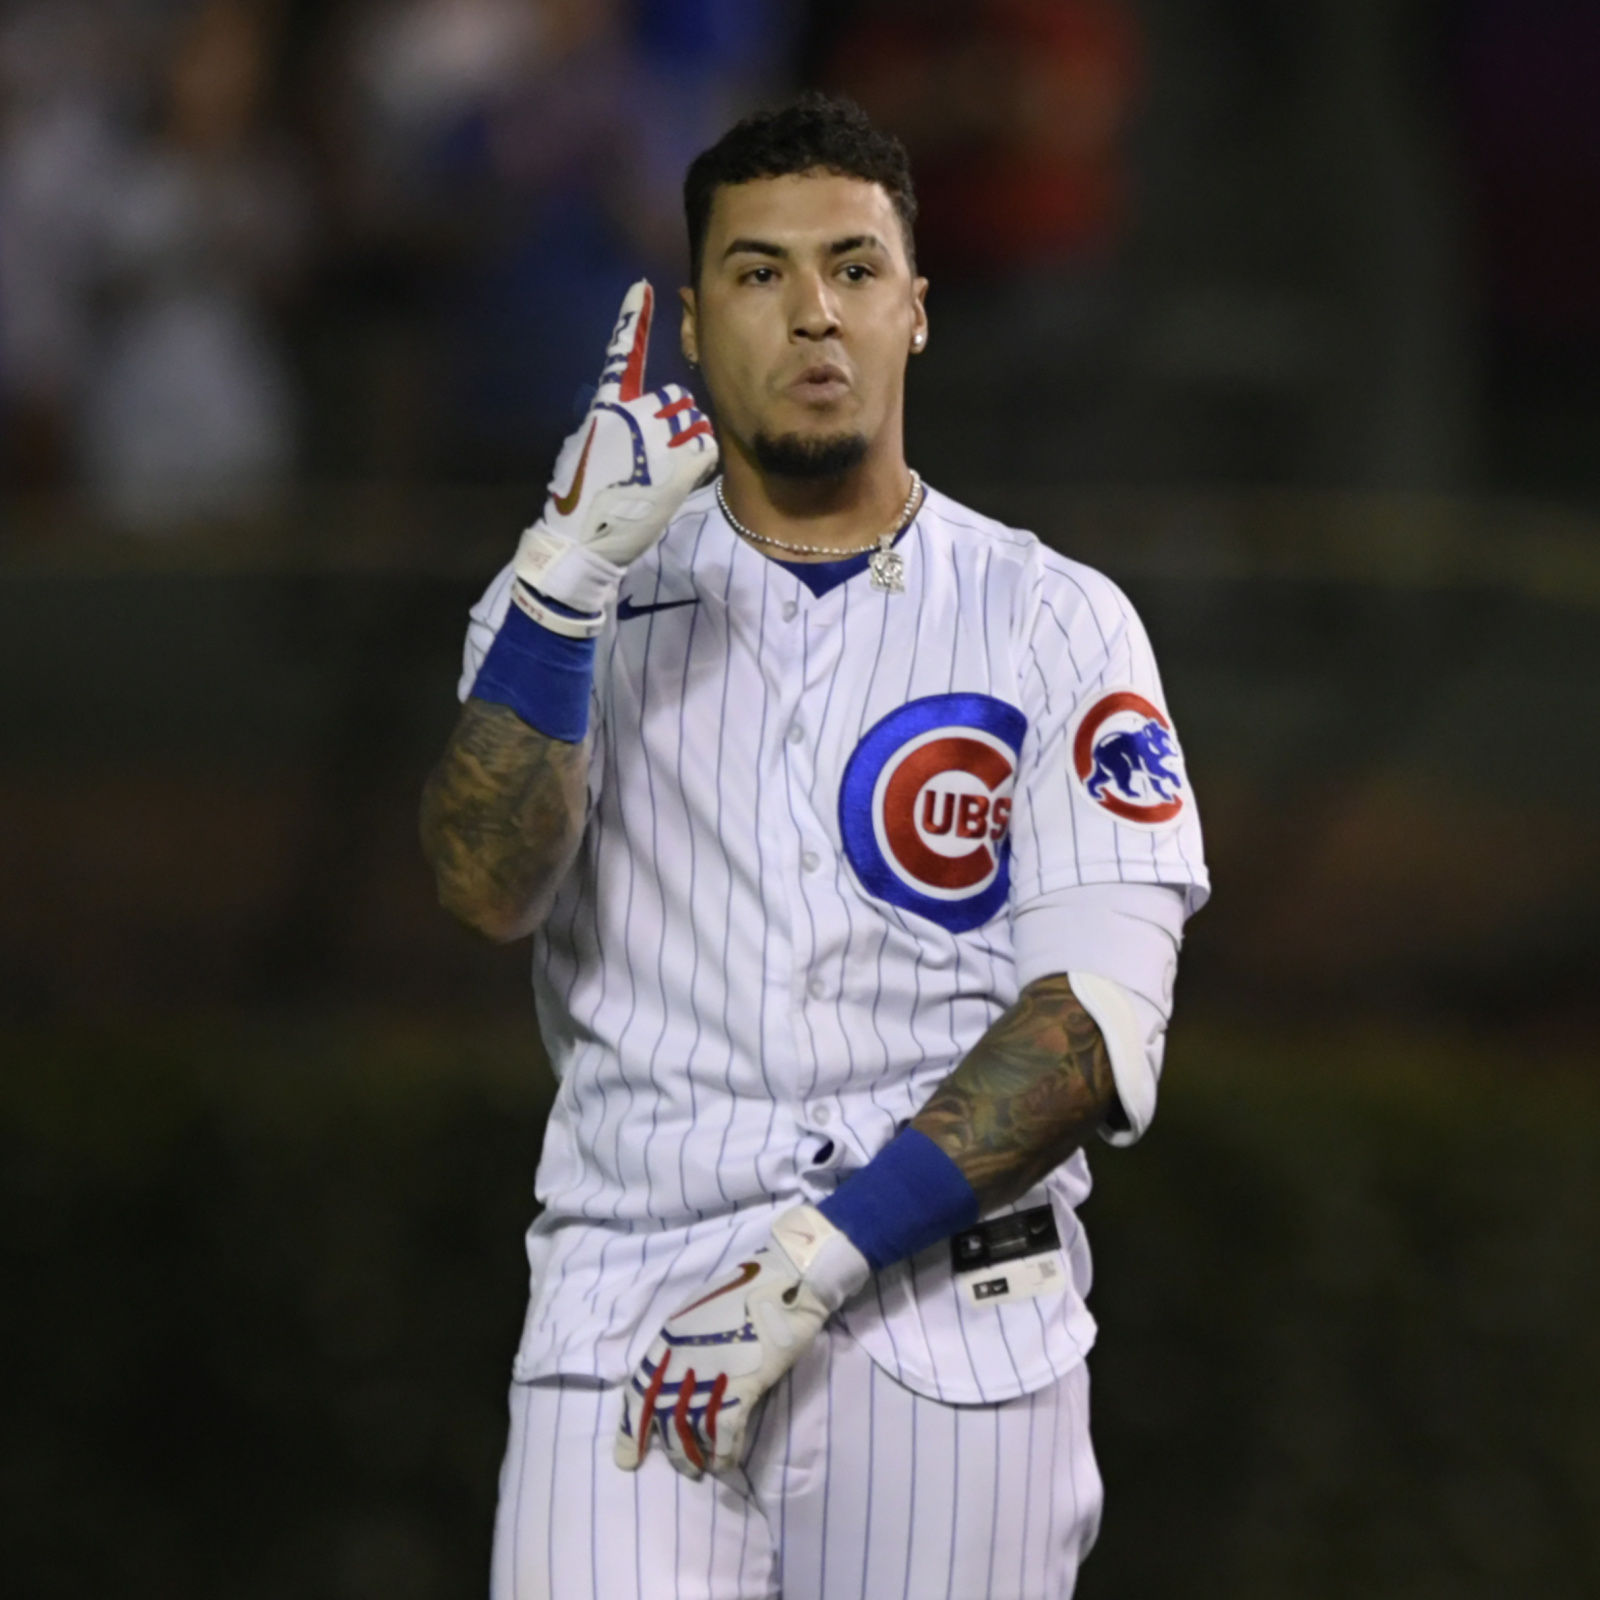 Scouts weigh in on Mets' addition of Javier Baez: 'The guy loves